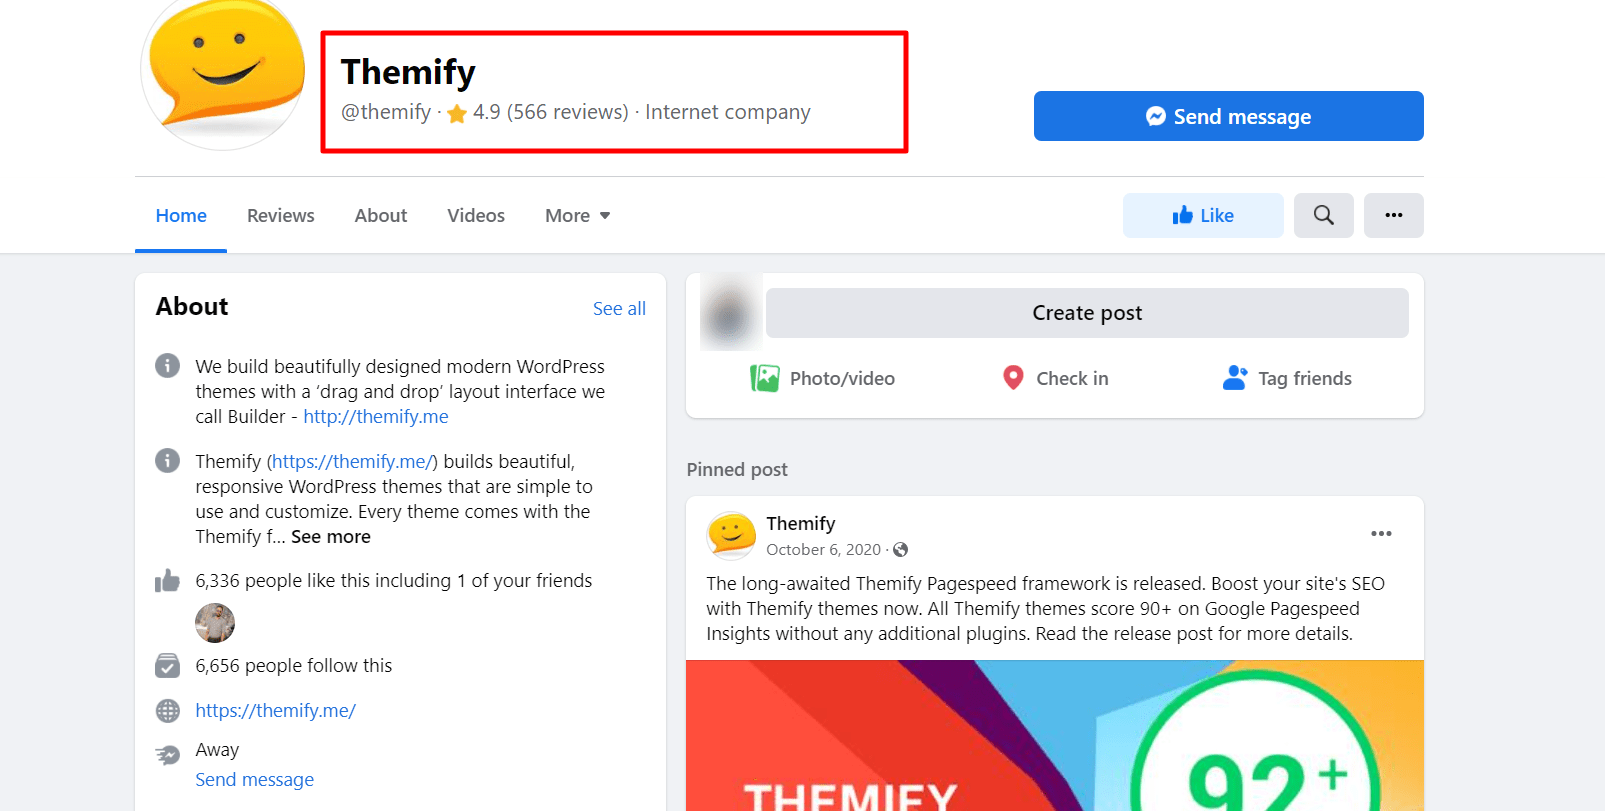 Themify facebook profile page